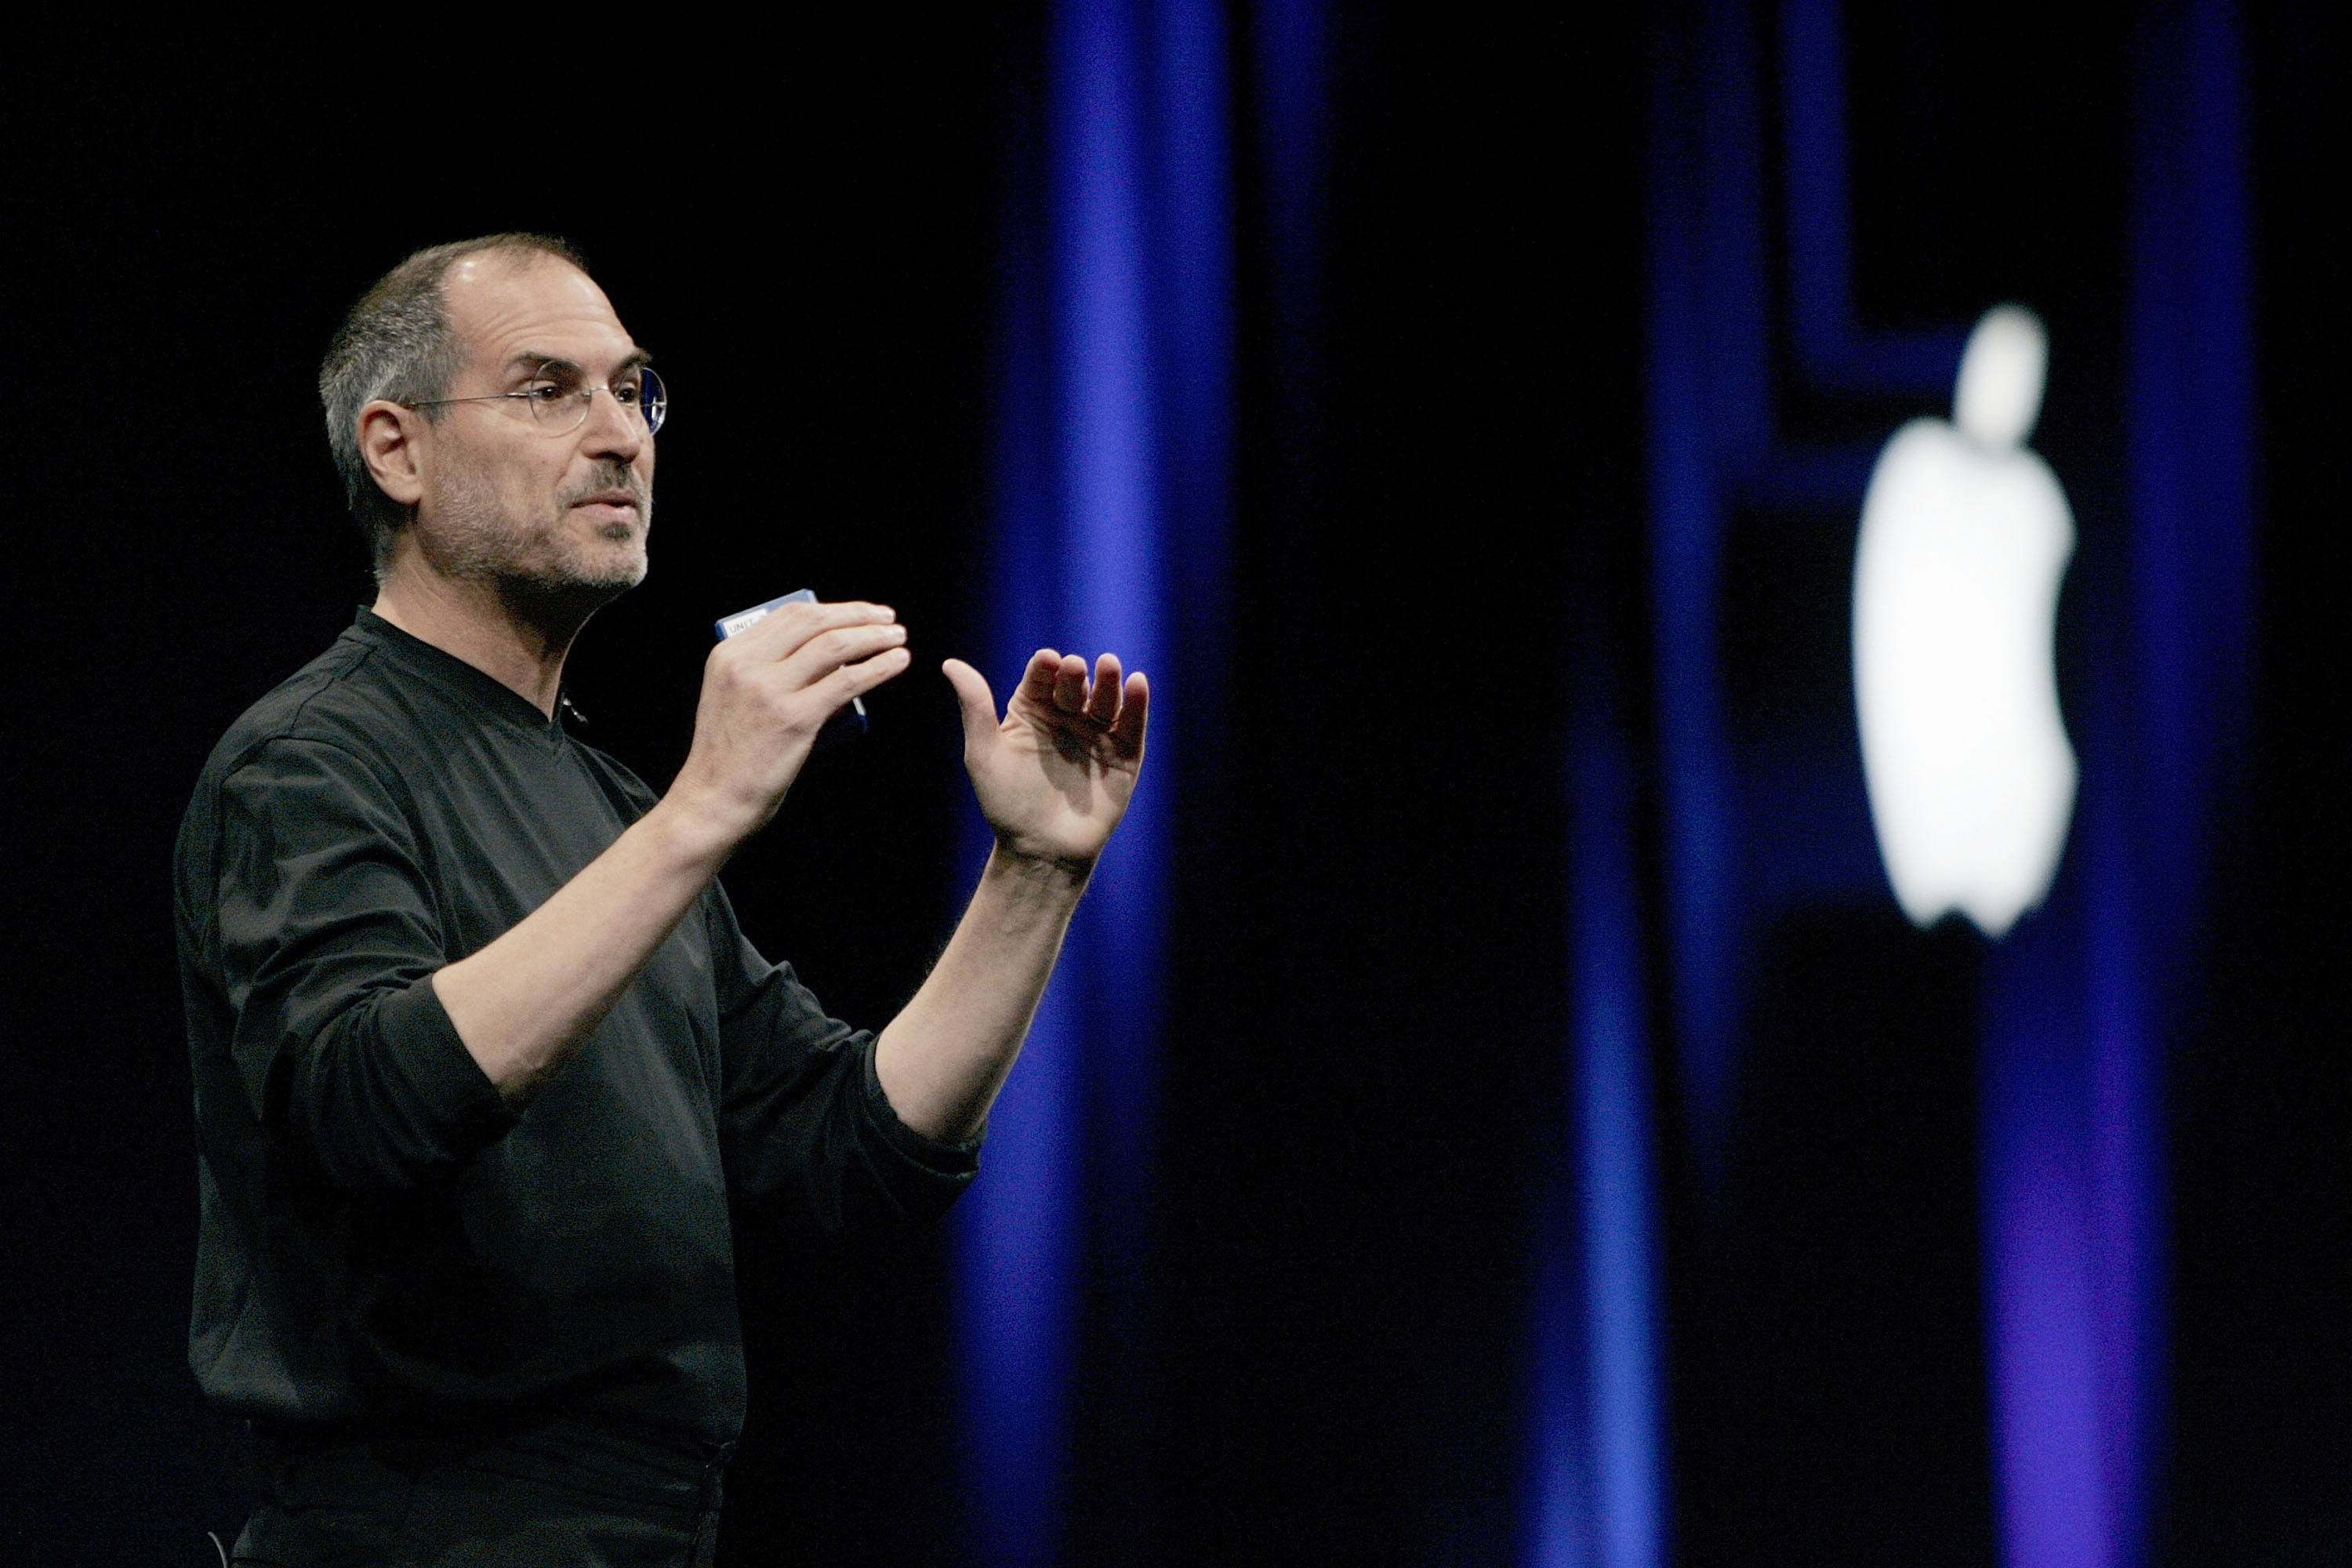 Steve Jobs opens the Apple Worldwide Developers conference in 2005